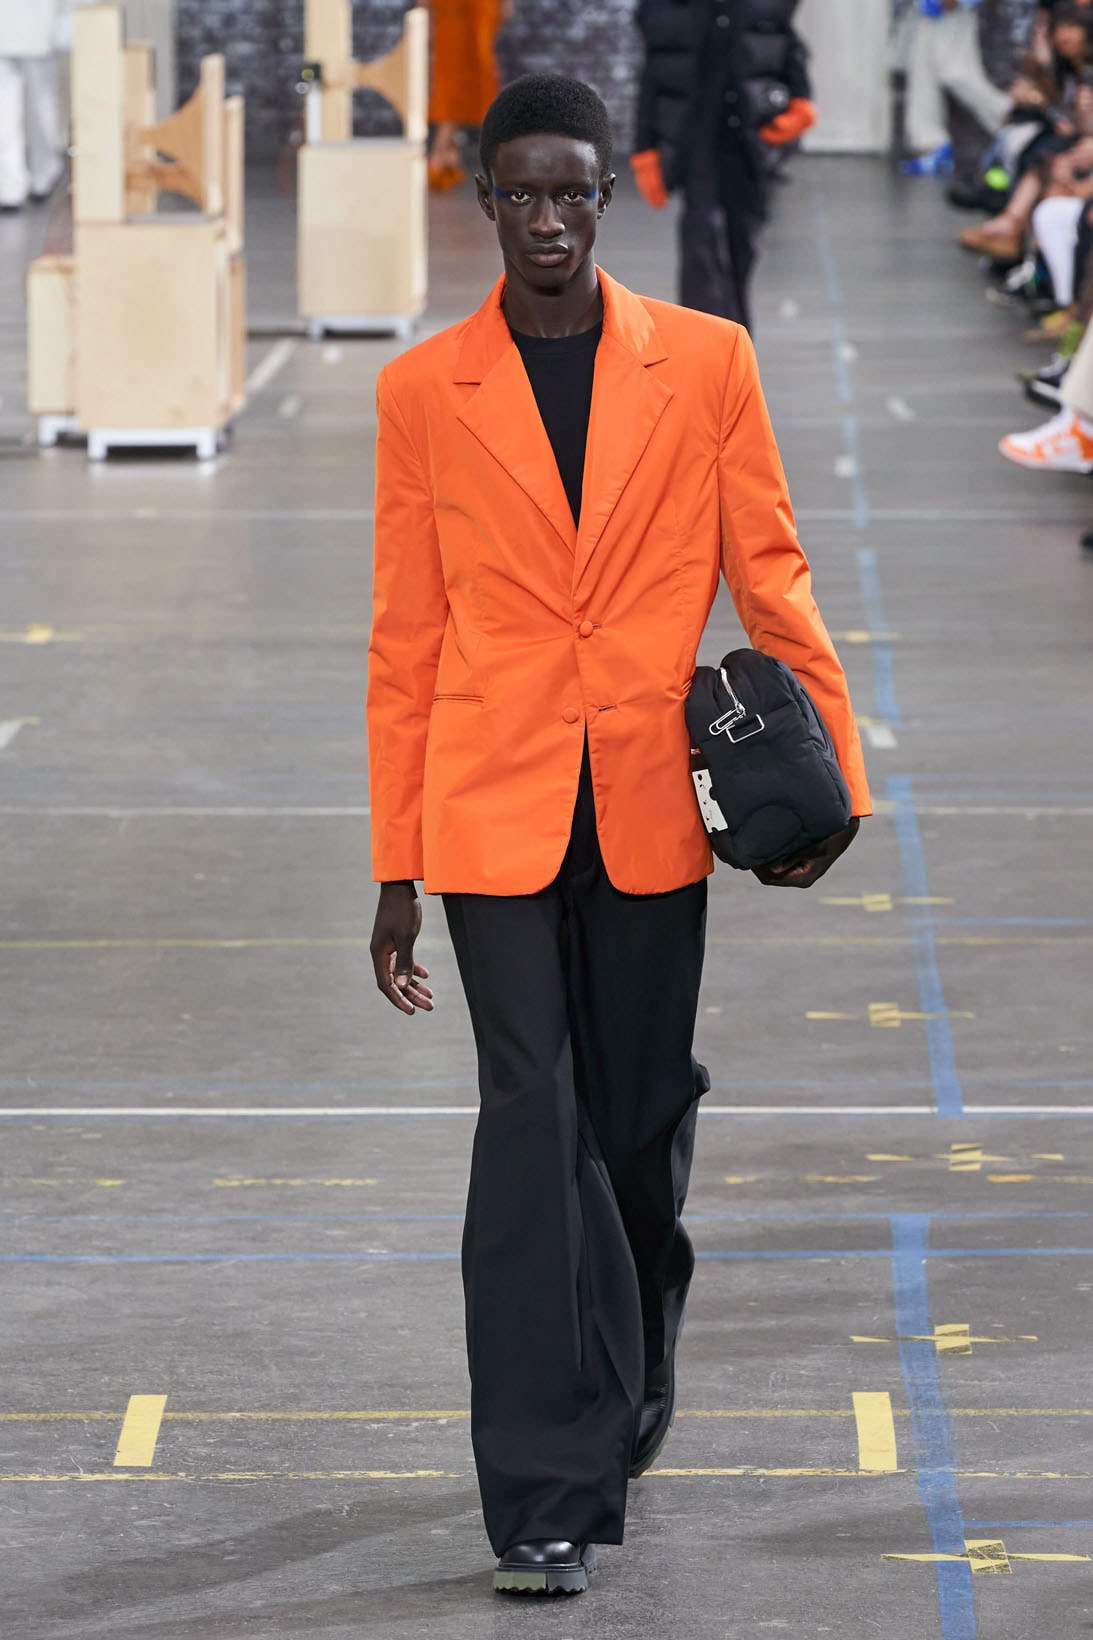 off-white virgil abloh fall winter collection runway laboratory of fun bella hadid amber valletta joan smalls m.i.a. watch 